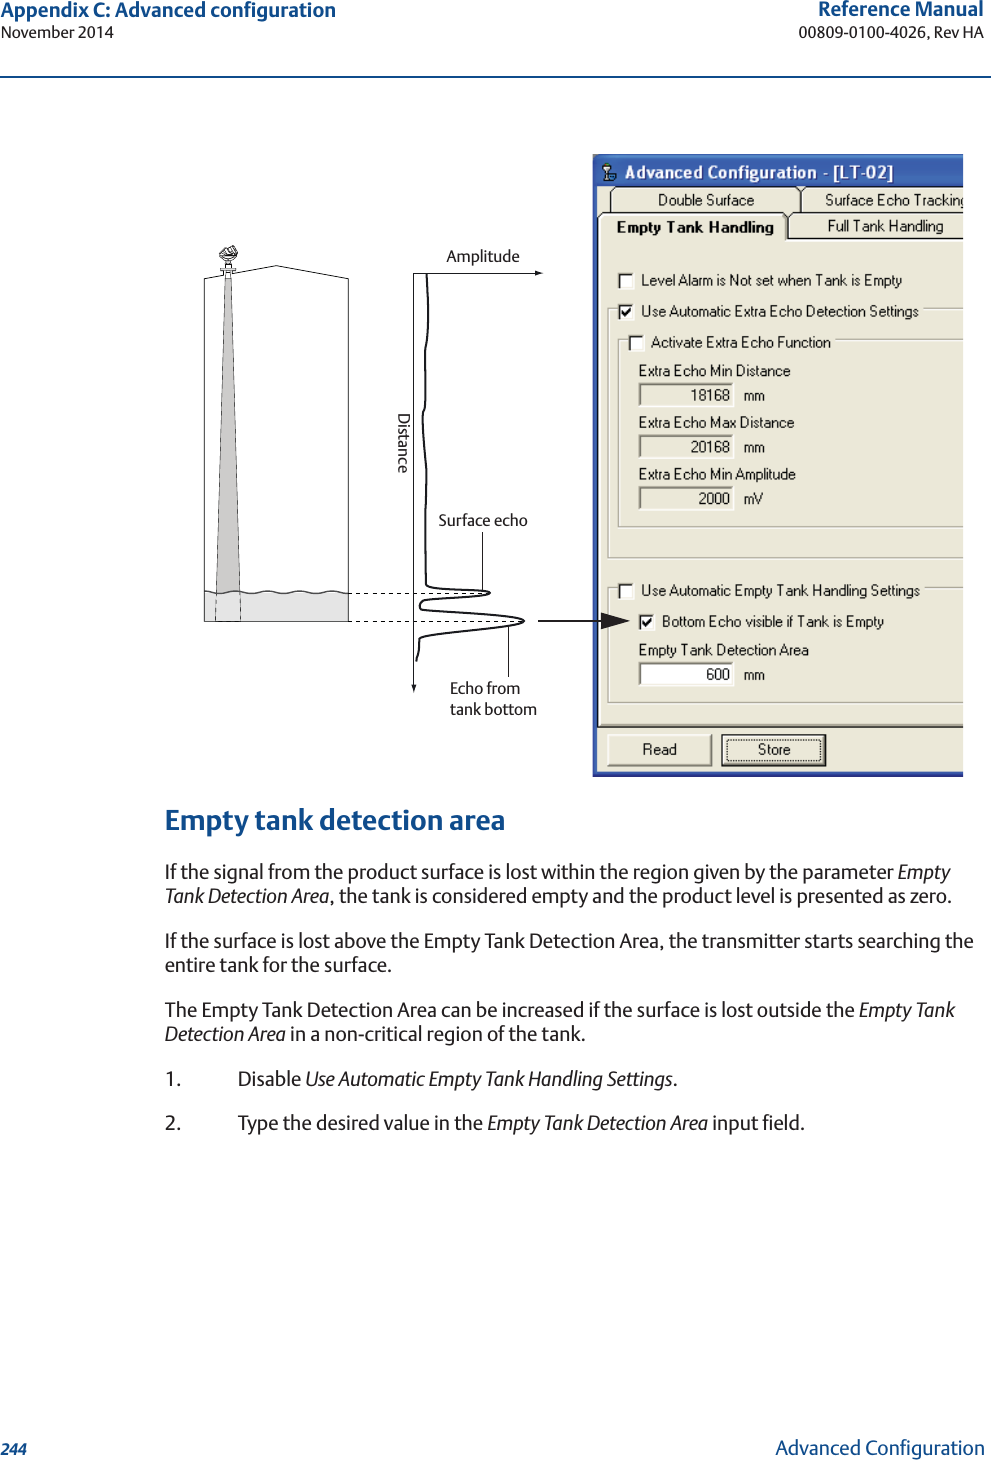 244Reference Manual00809-0100-4026, Rev HAAppendix C: Advanced configurationNovember 2014Advanced ConfigurationEmpty tank detection areaIf the signal from the product surface is lost within the region given by the parameter Empty Tank Detection Area, the tank is considered empty and the product level is presented as zero.If the surface is lost above the Empty Tank Detection Area, the transmitter starts searching the entire tank for the surface.The Empty Tank Detection Area can be increased if the surface is lost outside the Empty Tank Detection Area in a non-critical region of the tank.1. Disable Use Automatic Empty Tank Handling Settings.2. Type the desired value in the Empty Tank Detection Area input field.AmplitudeDistanceEcho from tank bottomSurface echo